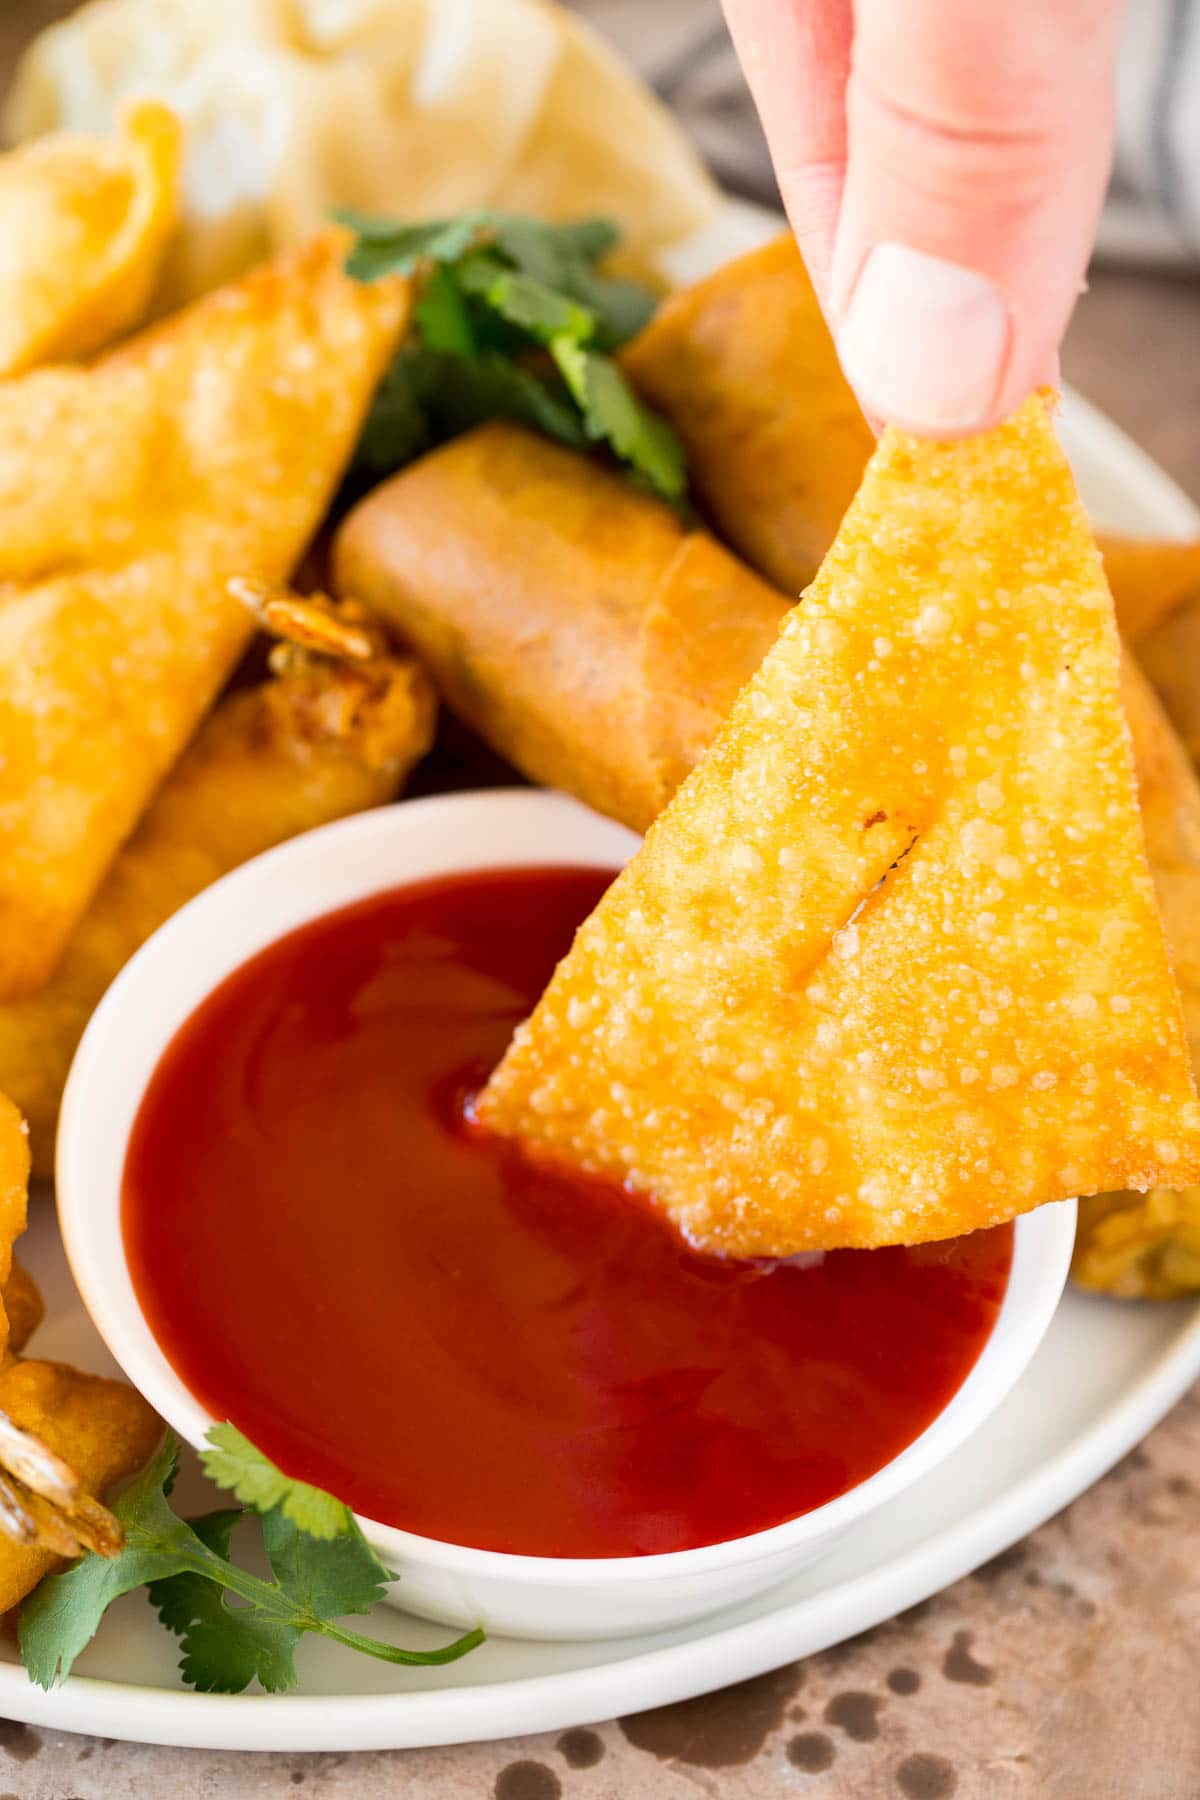 A wonton being dipped into a bowl of sweet and sour sauce.